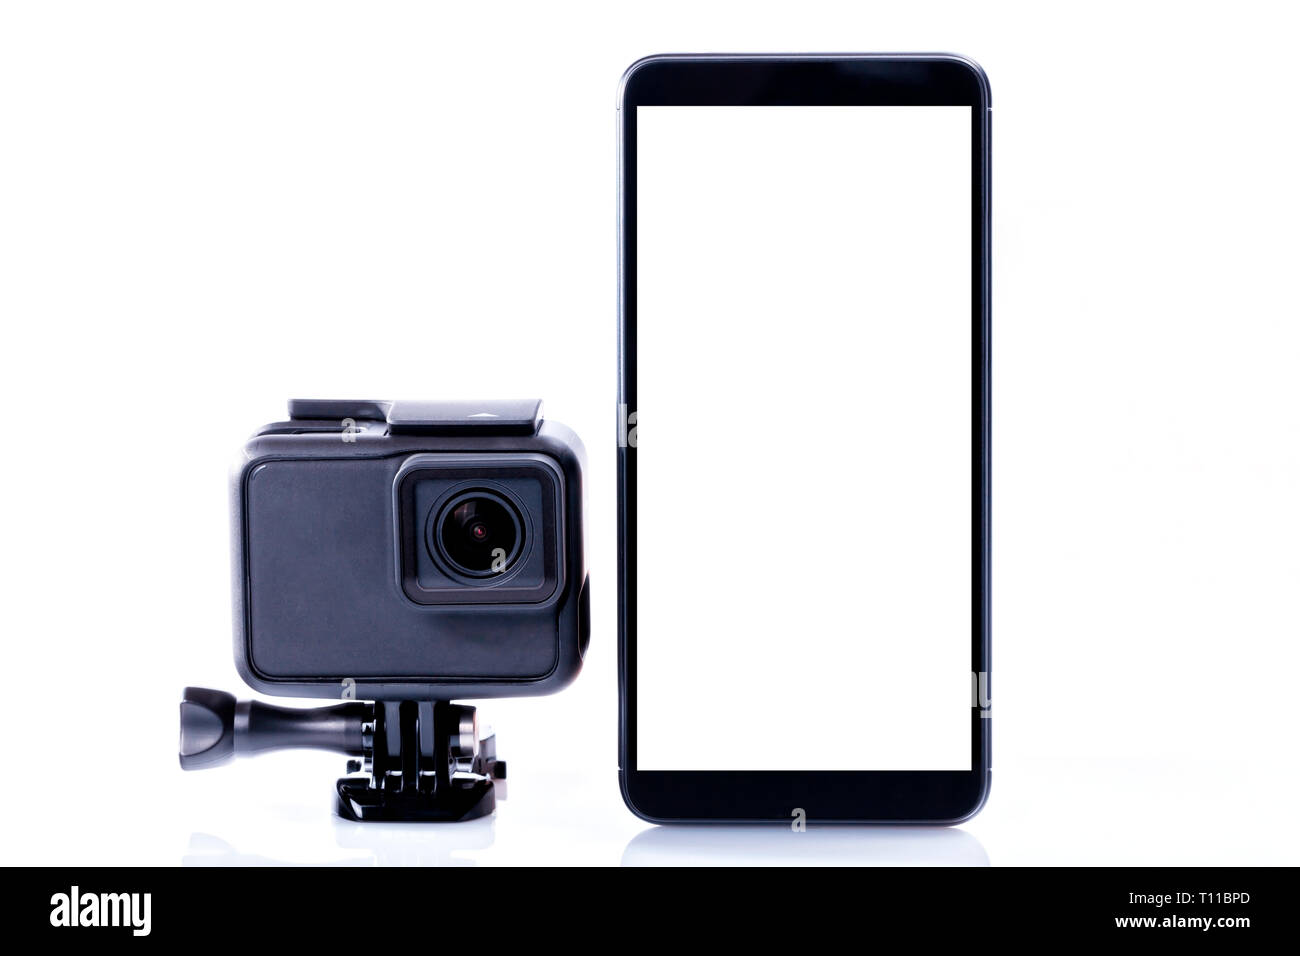 A modern video sports camera next to a black smartphone with screen in blank isolated on white. Stock Photo